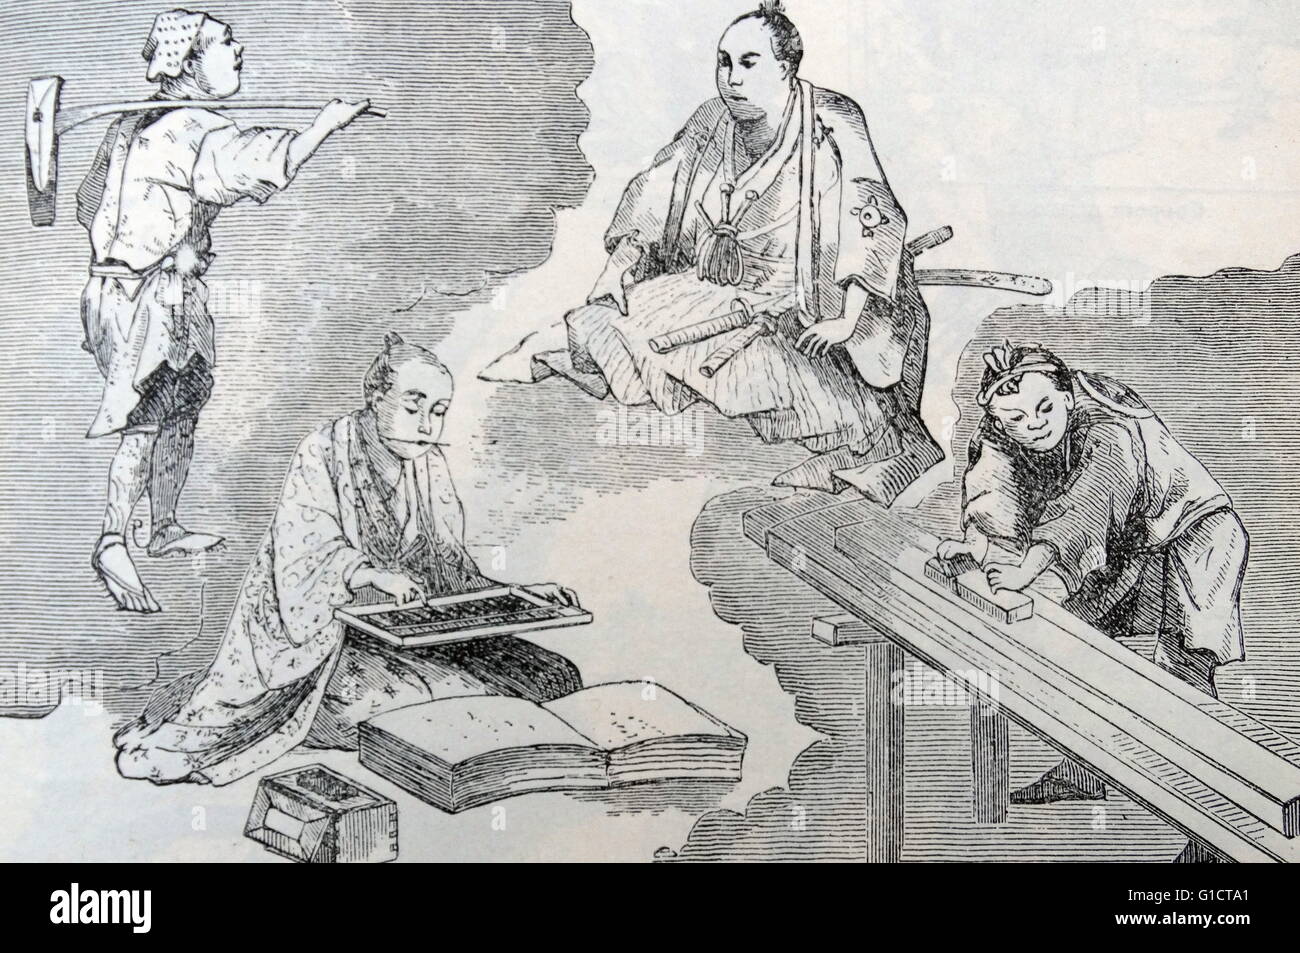 Illustration from 1870 showing class divisions in imperial Japan. The seated noble or Shi; The figure carrying a farming implement represents the agricultural class (No); The third class is represented by a skilled artisan or Ko; seen planning wood. The lowest class were the traders or merchants (Sho) seen here as a man using an abacus. Stock Photo